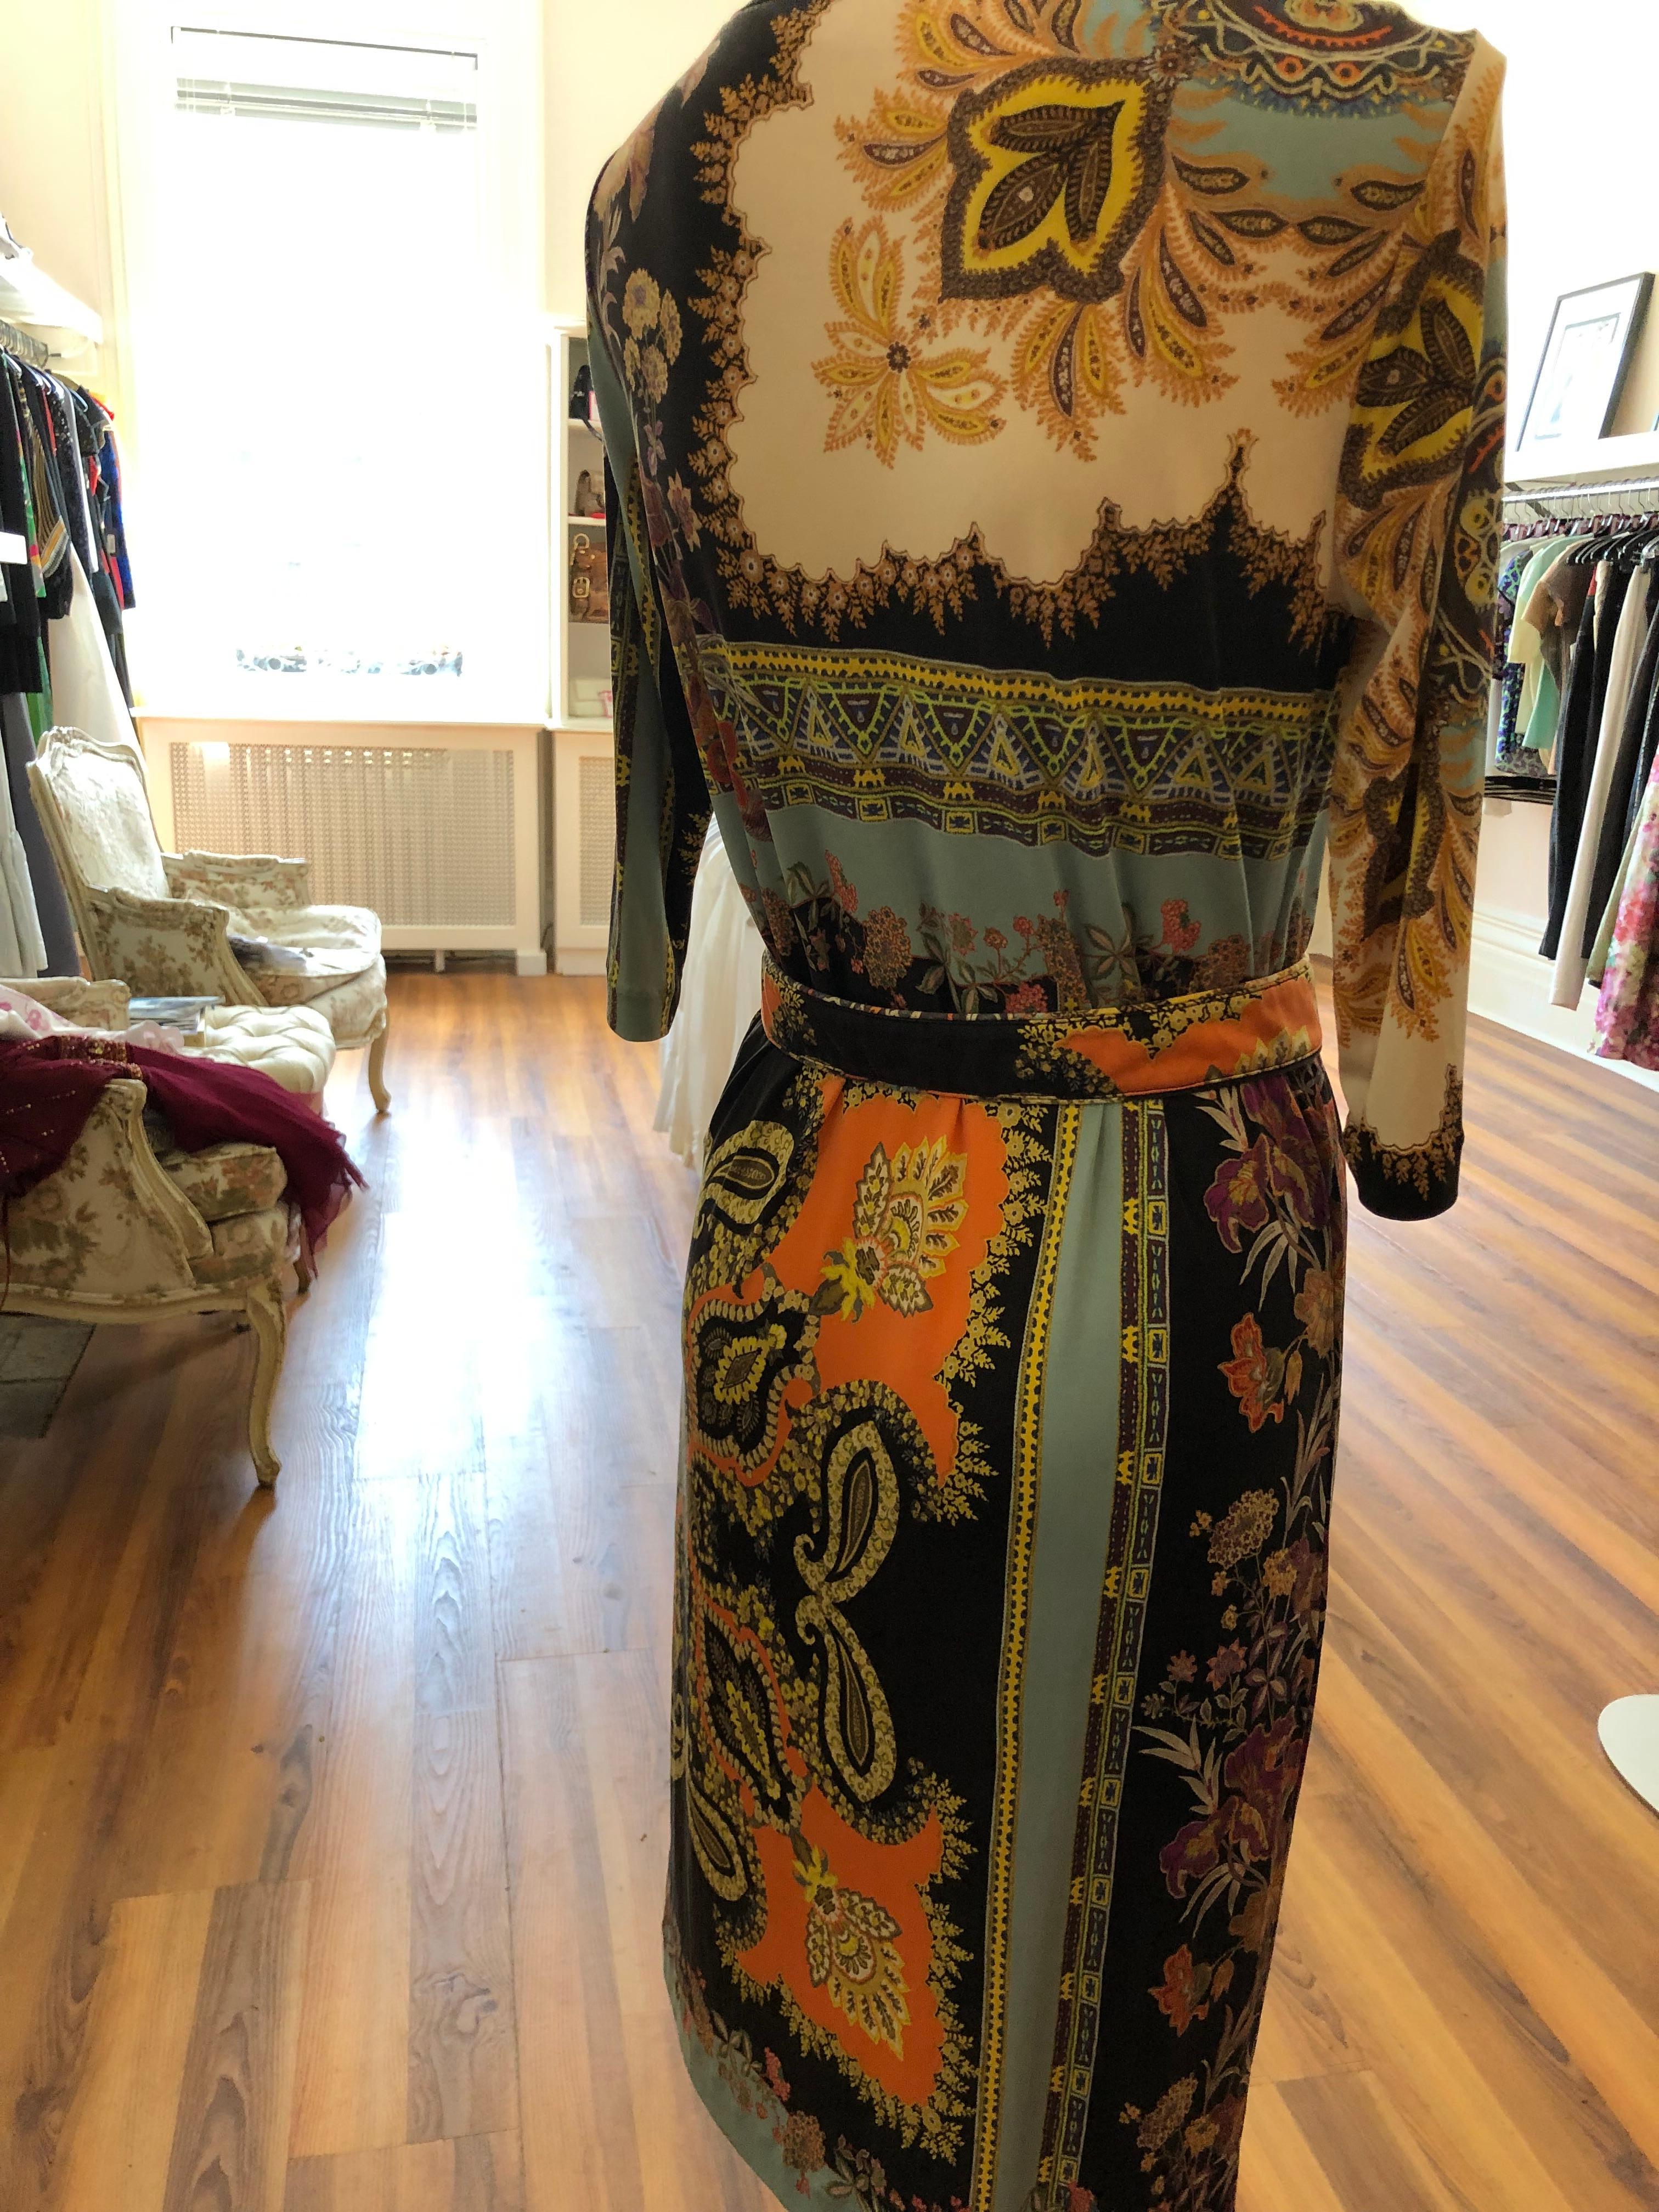 Mixed paisley and floral pattern in brilliant colors, this dress can be worn on its own or with the belt provided. Suitable as a day or cocktail dress.